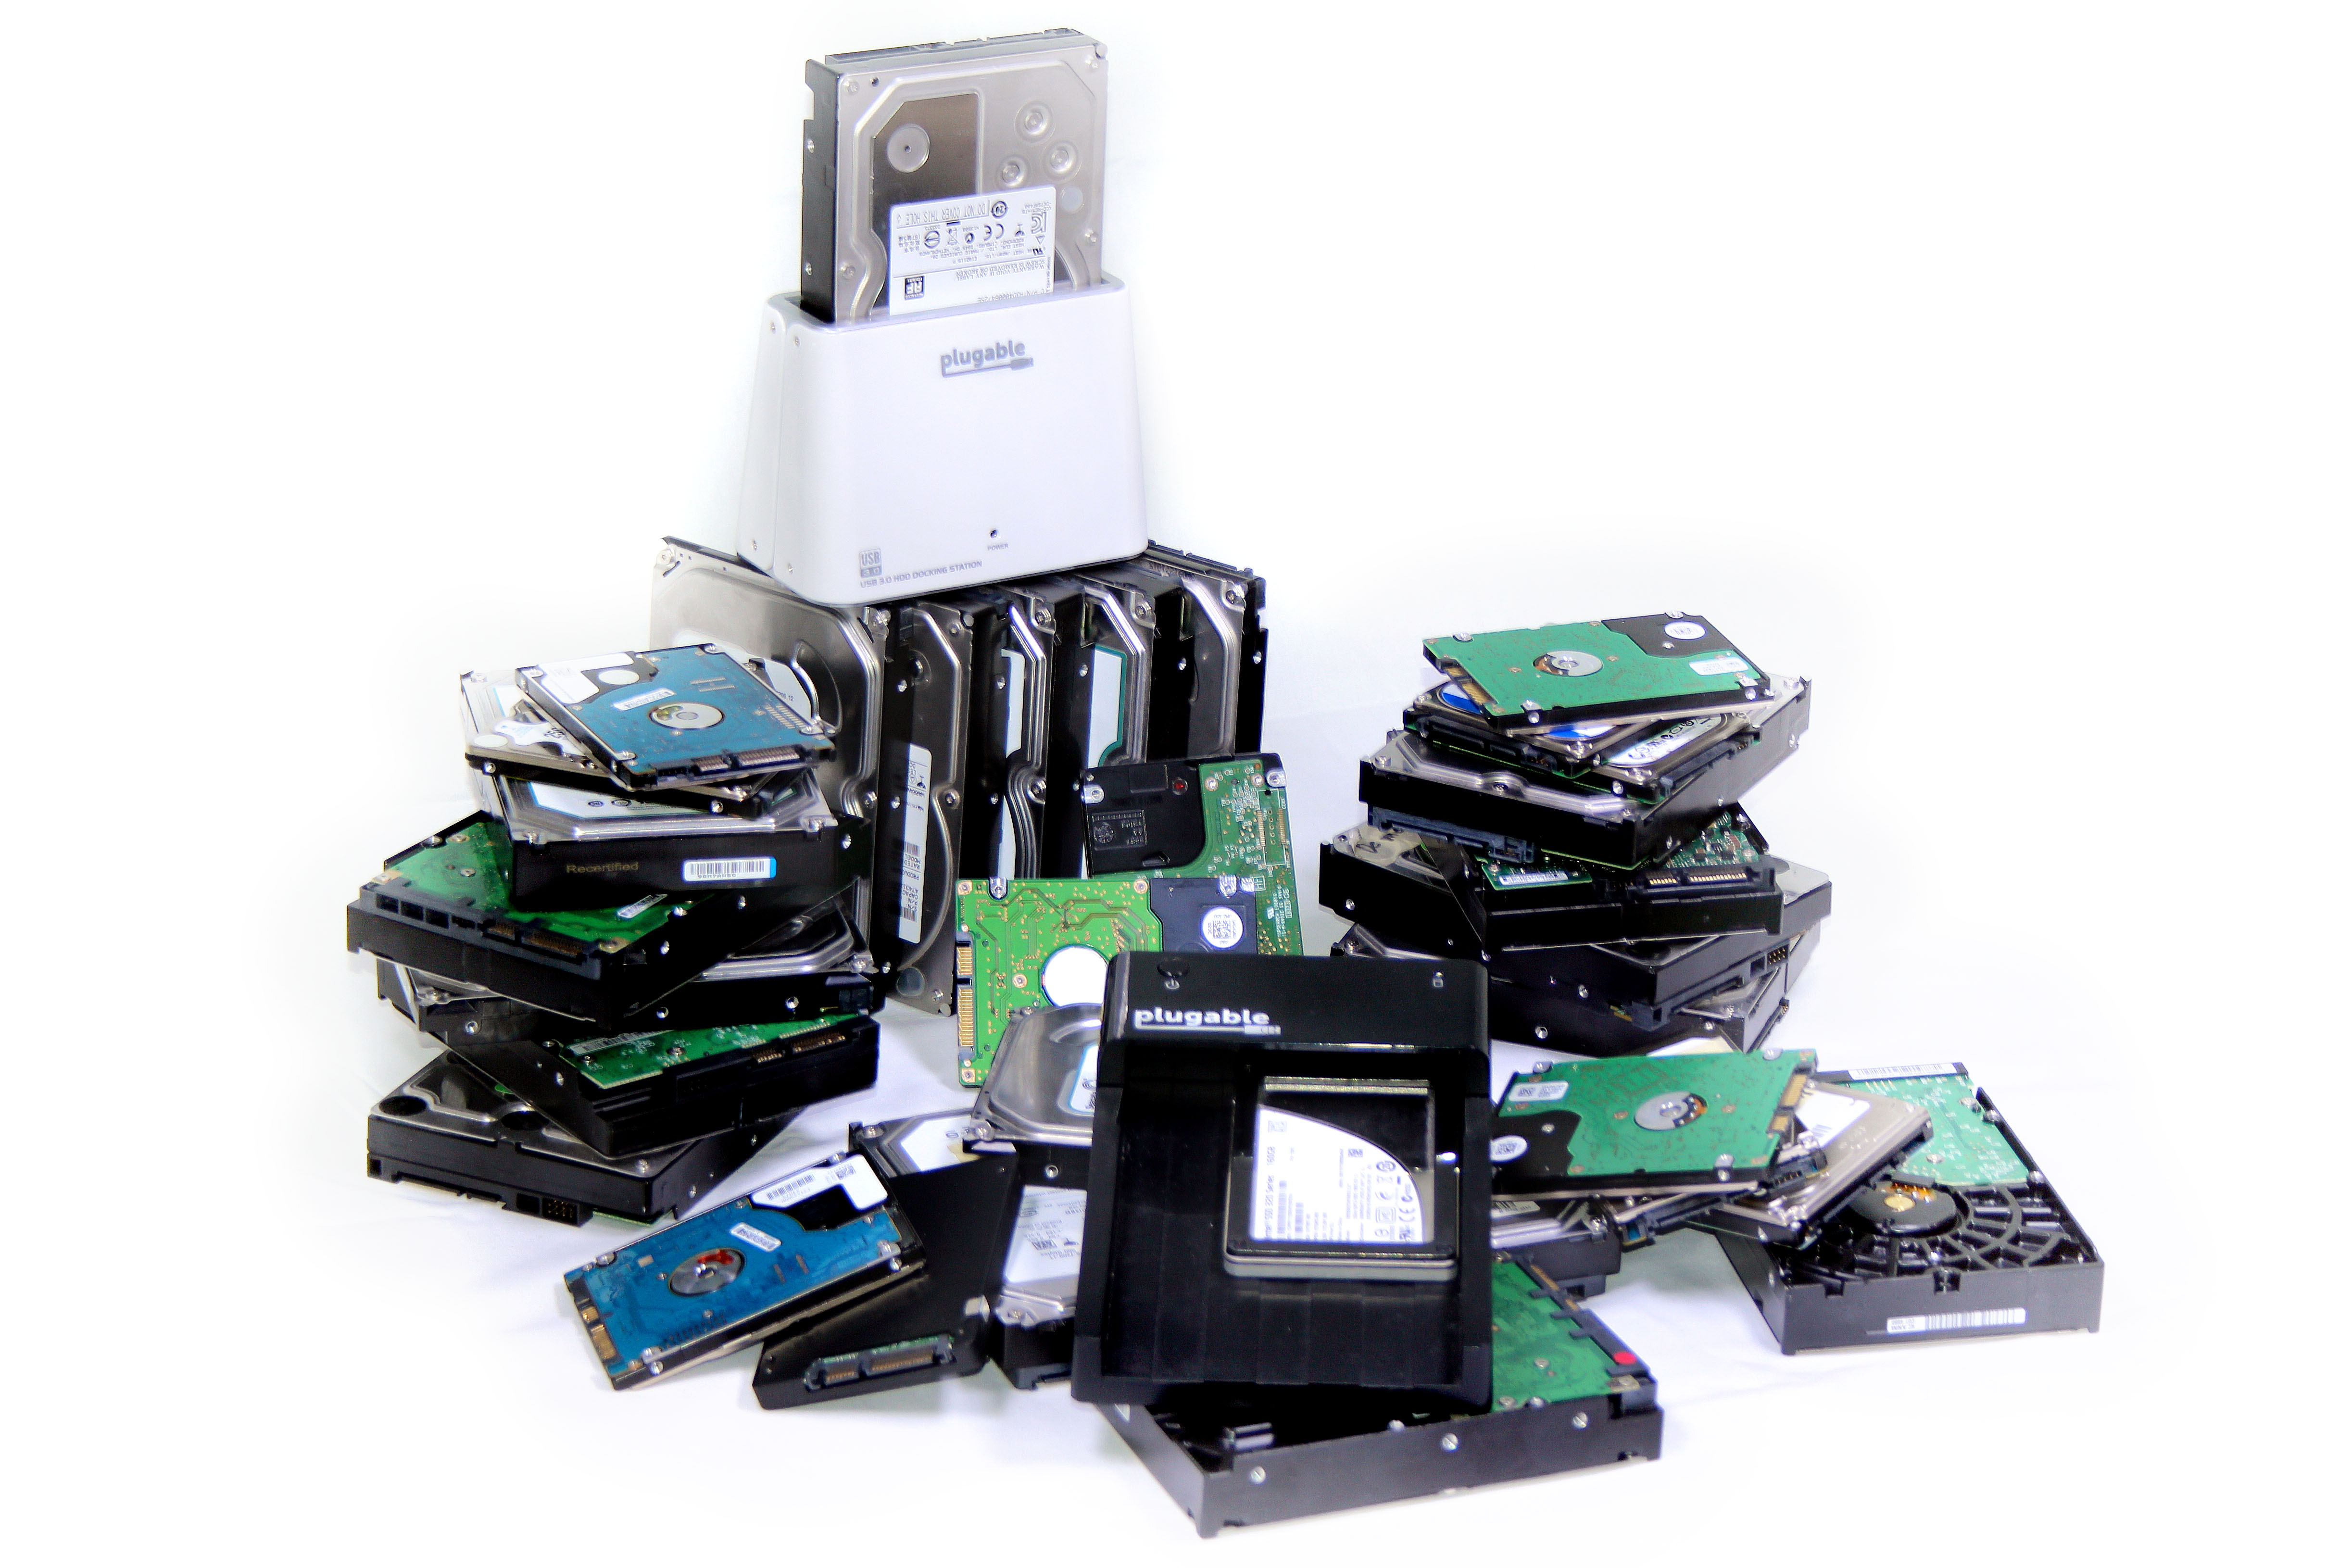 Stack of drives and docks